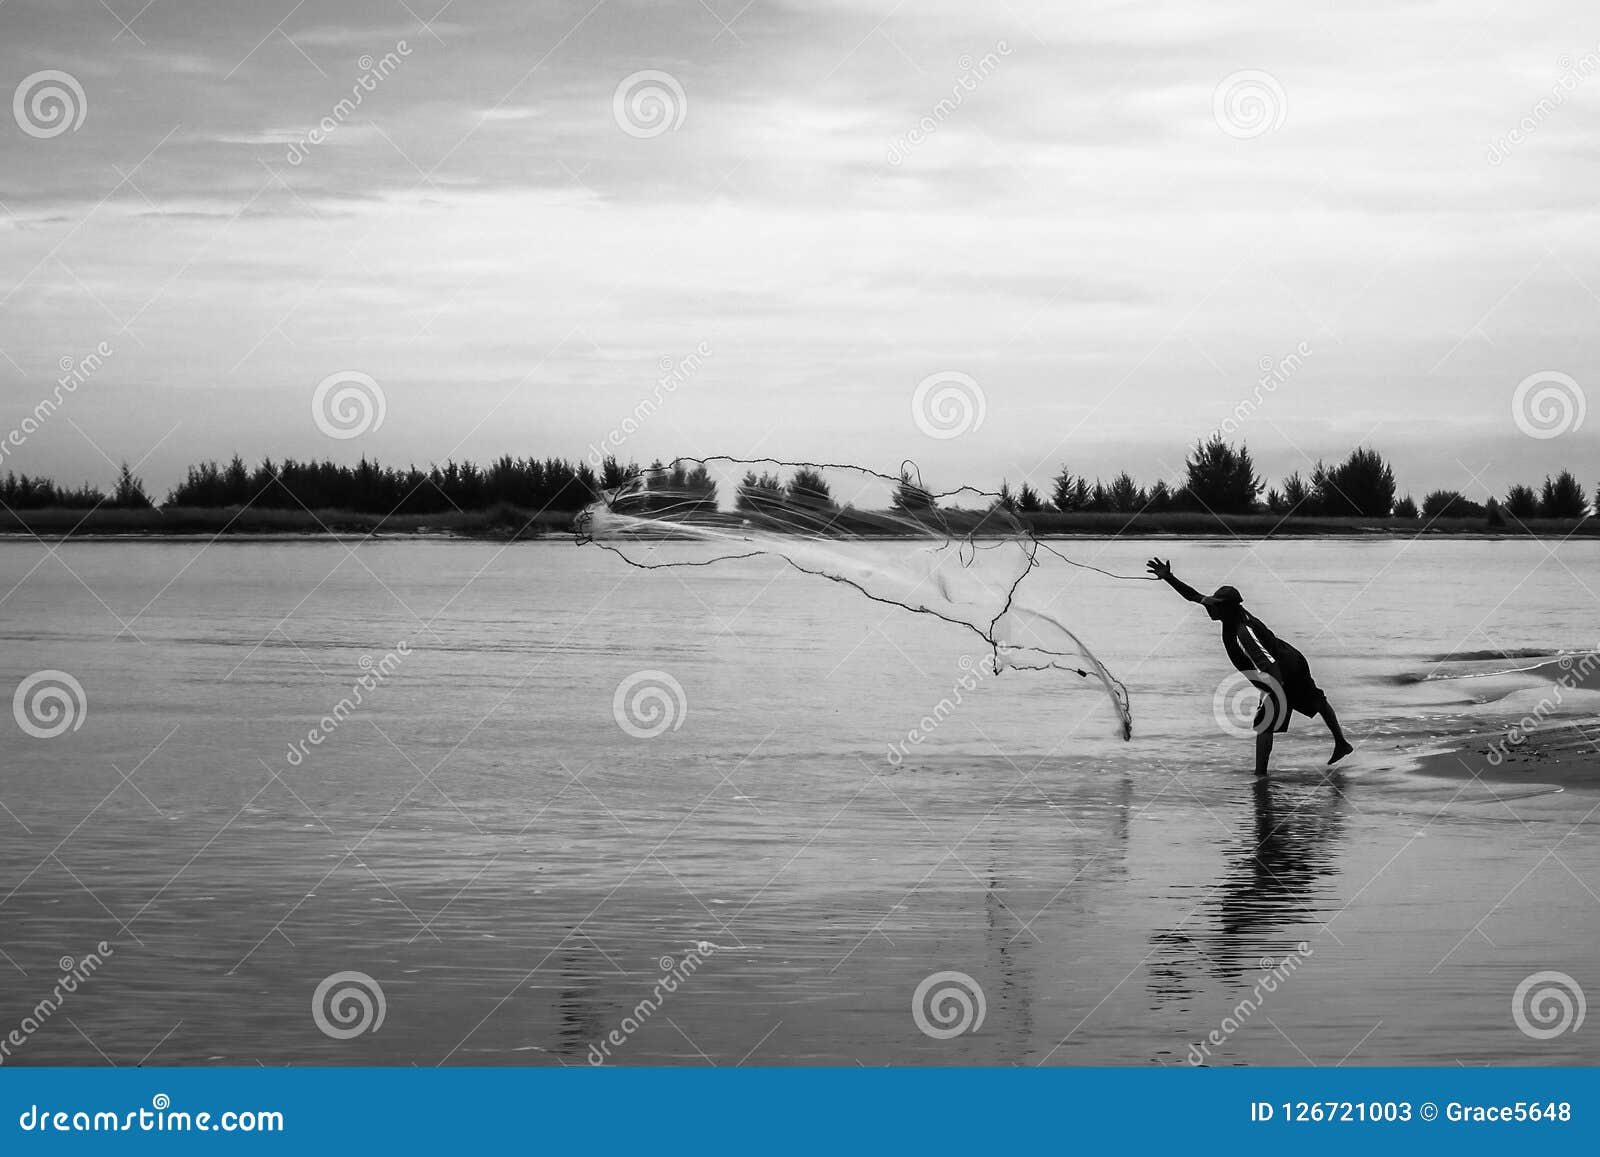 Fishermen Throw a Fishing Net To Catch Fishes Editorial Stock